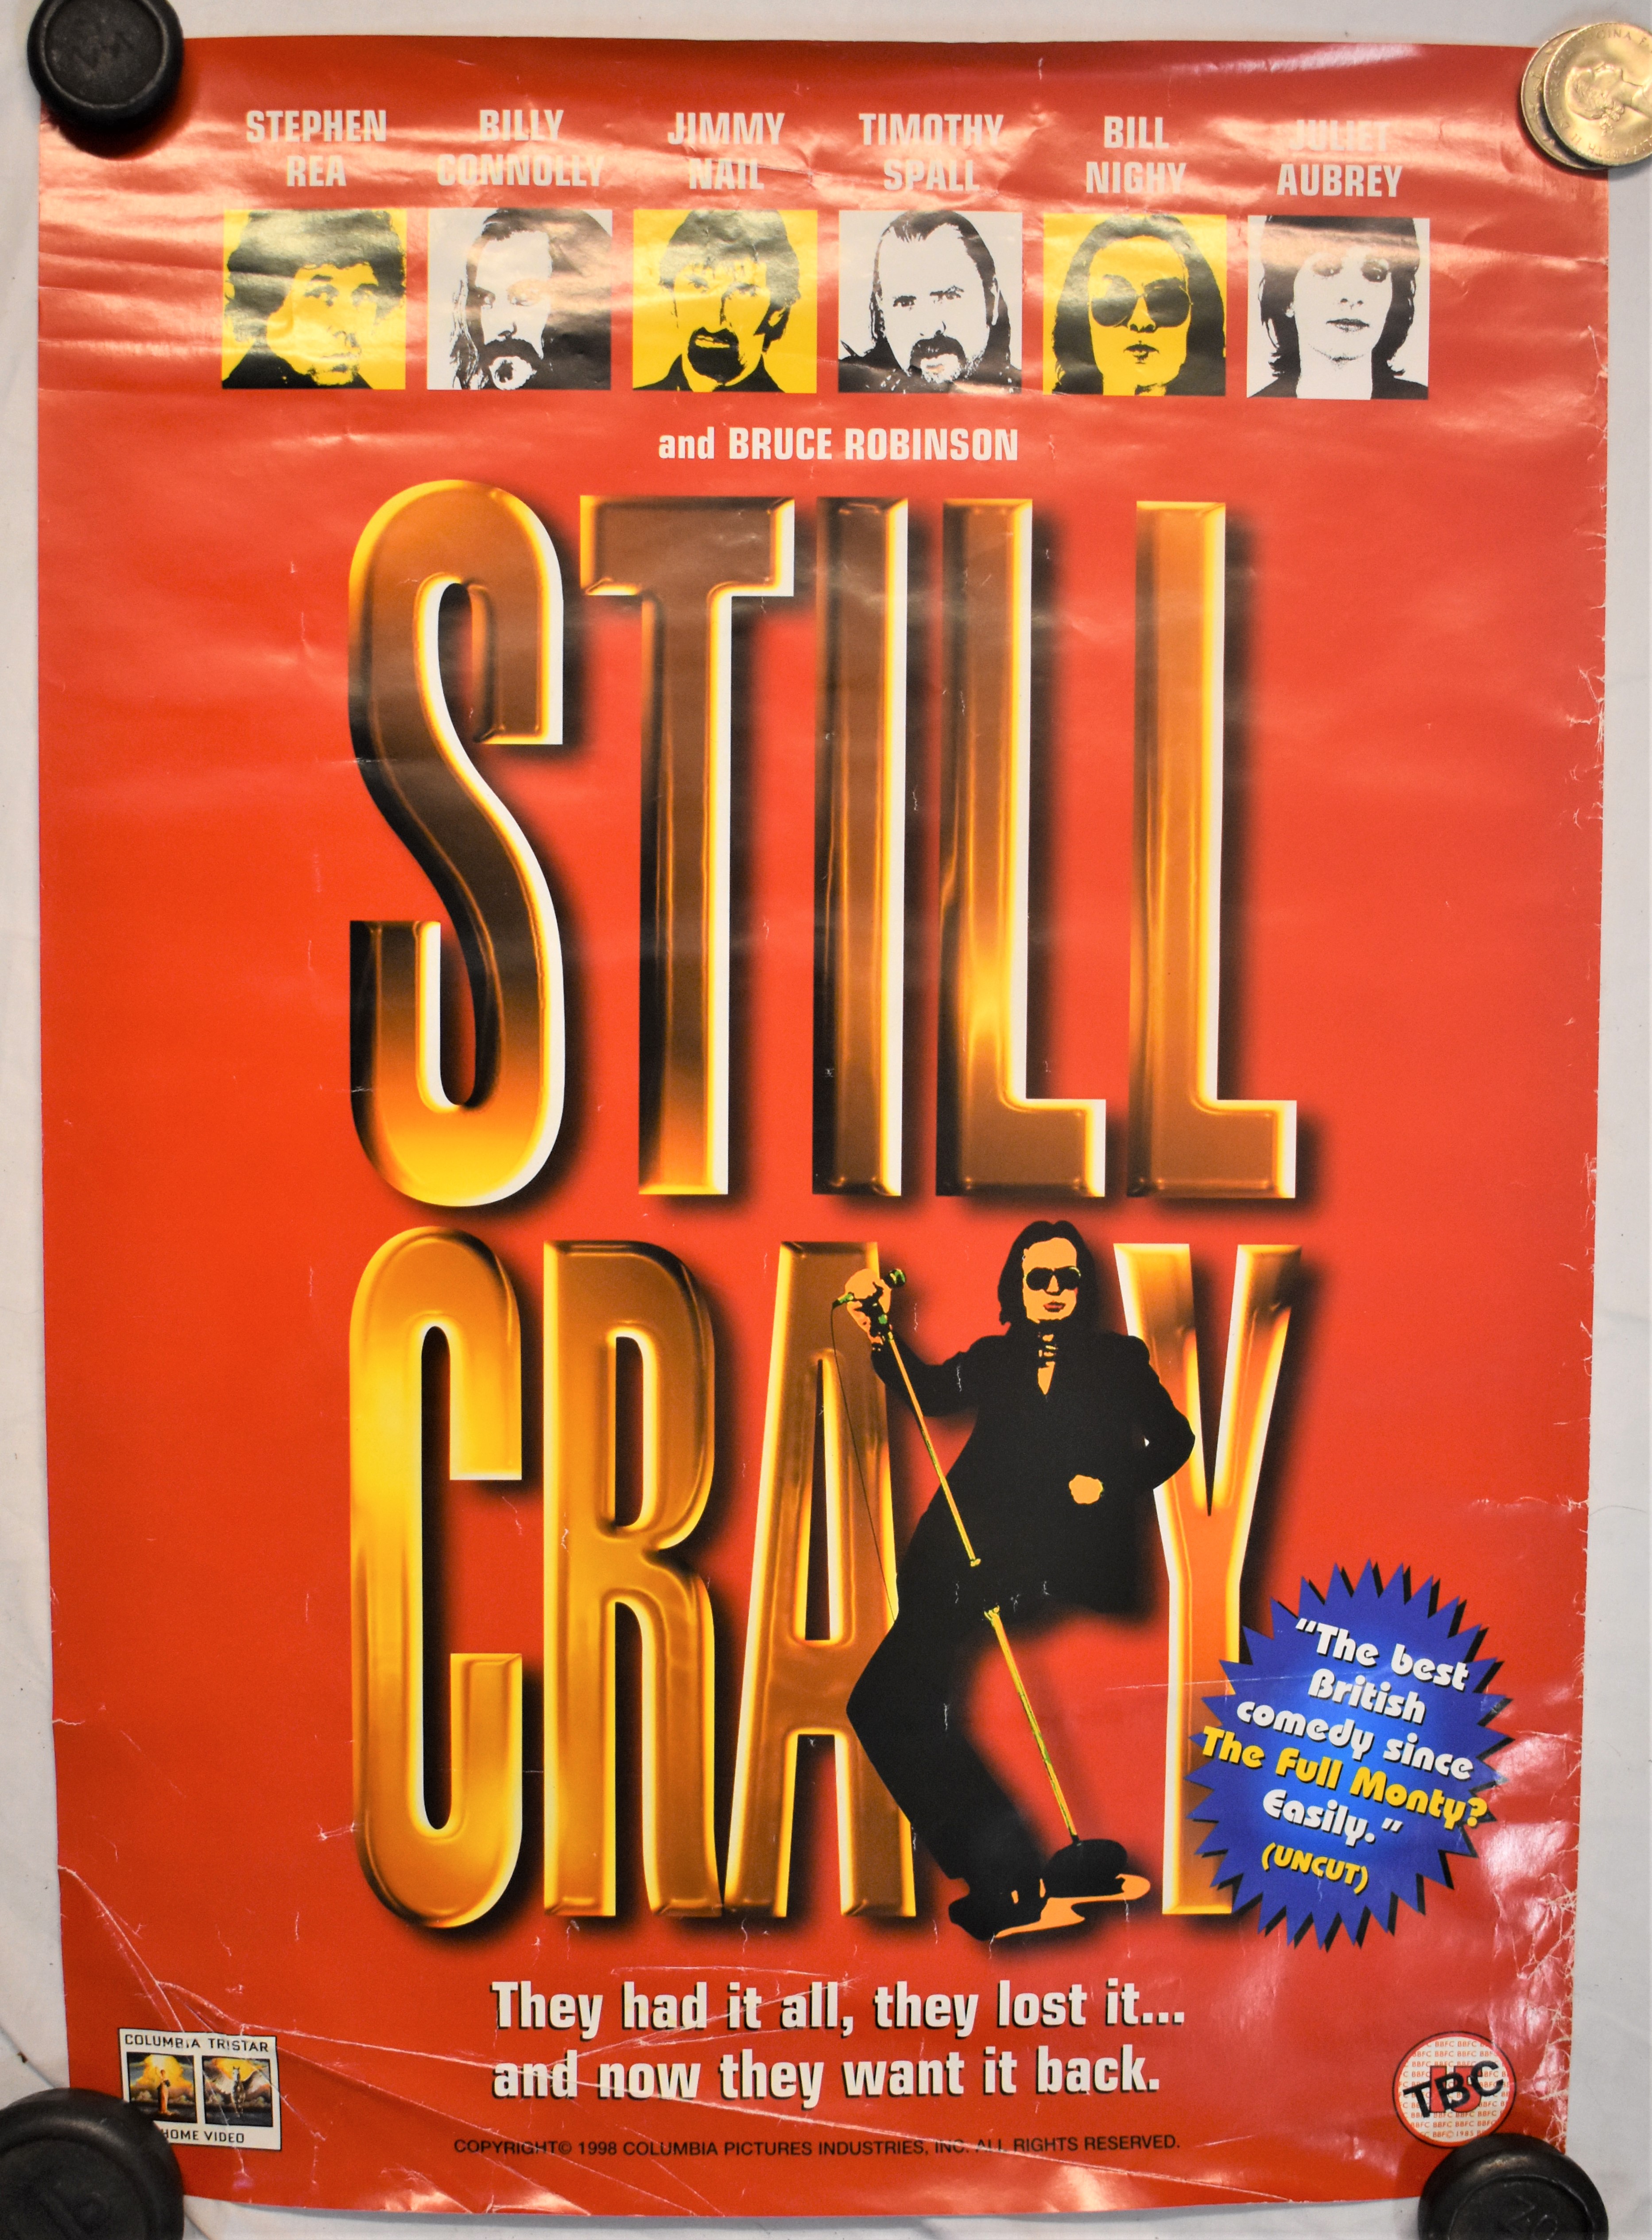 Film Posters (5) - 'Still Crazy' starring Billy Connolly & Jimmy Nail. Measures 59cm x 42cm, Play/ - Image 5 of 5